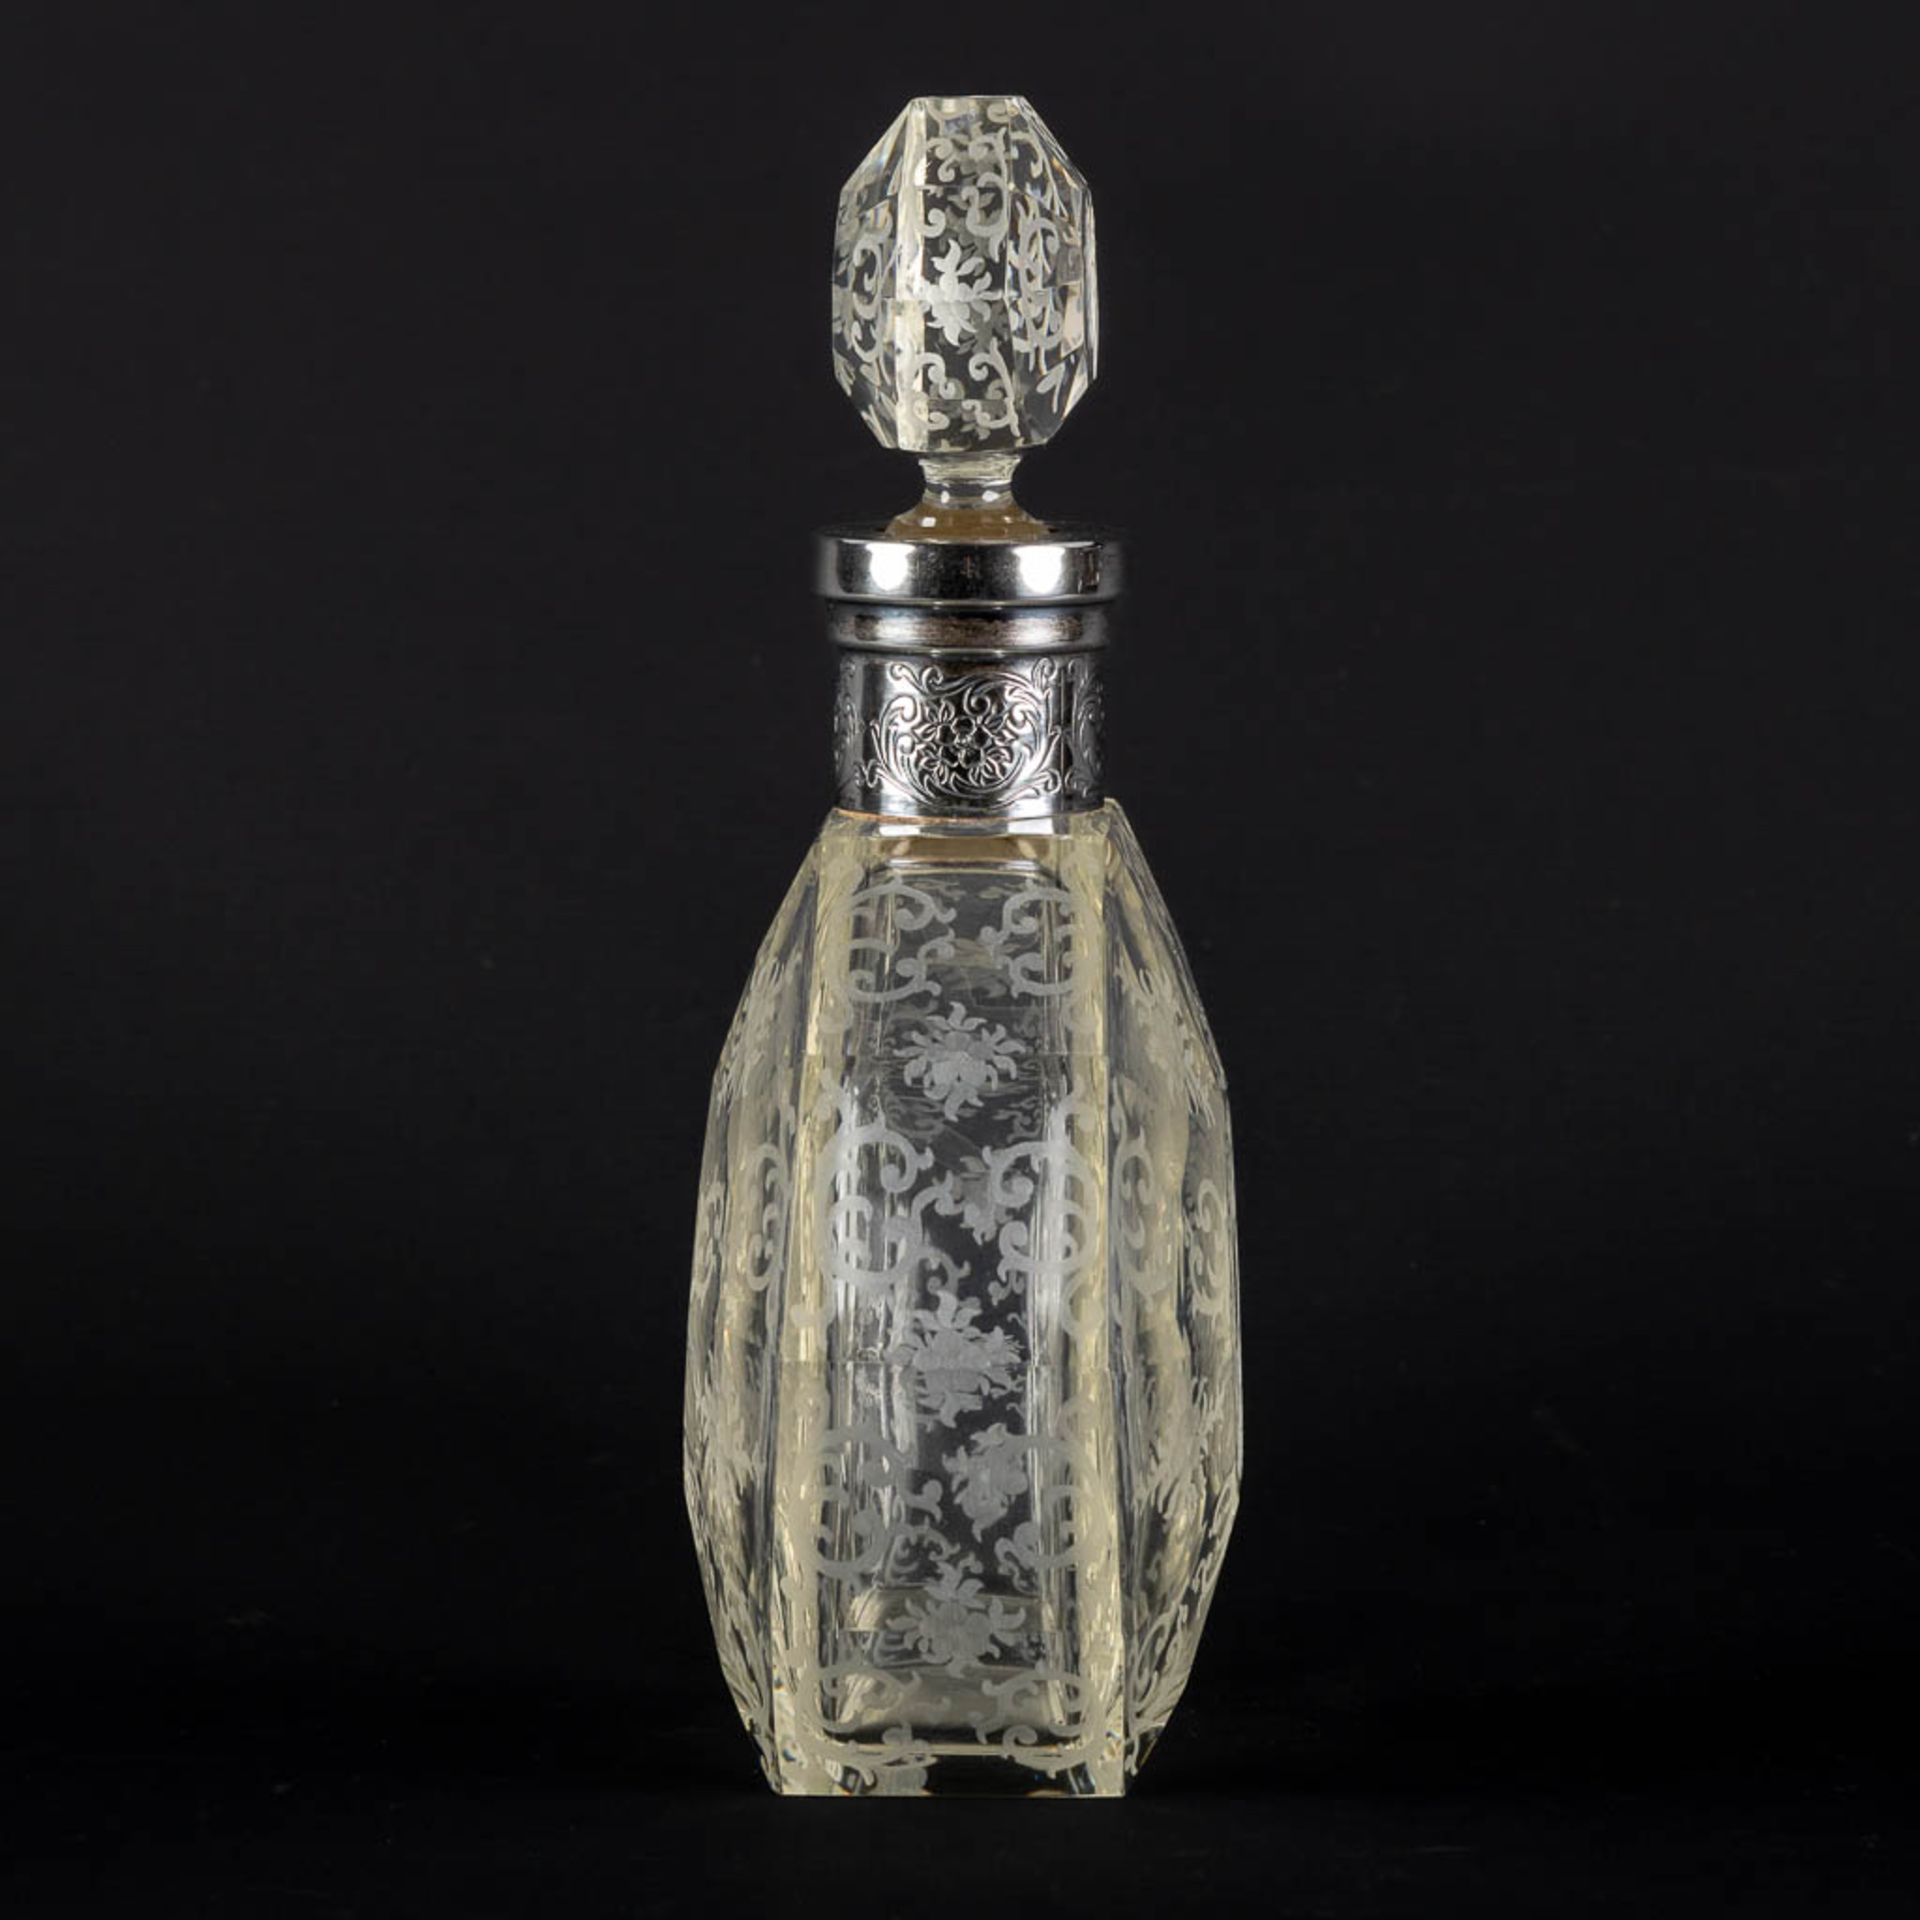 A perfume bottle, etched and mounted with a silver collar, glass. 19th C. (L:8 x W:17 x H:26,5 cm) - Bild 4 aus 11